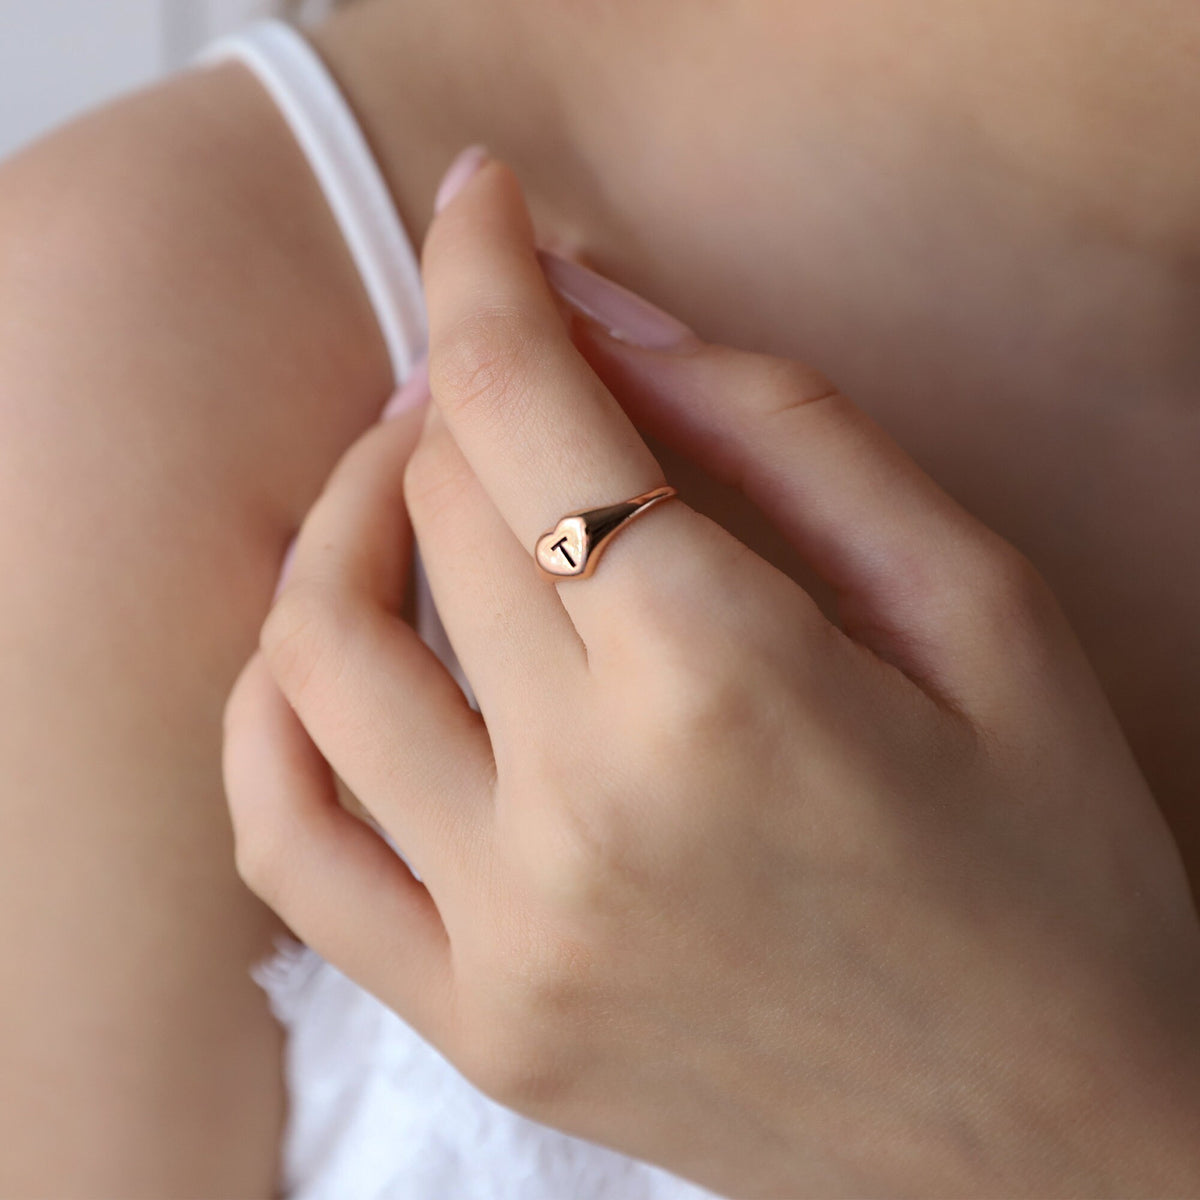 Custom Cute Gold Initial Heart Ring • Silver Personalized Engraved Tiny Letter Ring • Stackable Rose Gold Jewelry • Gift for Her